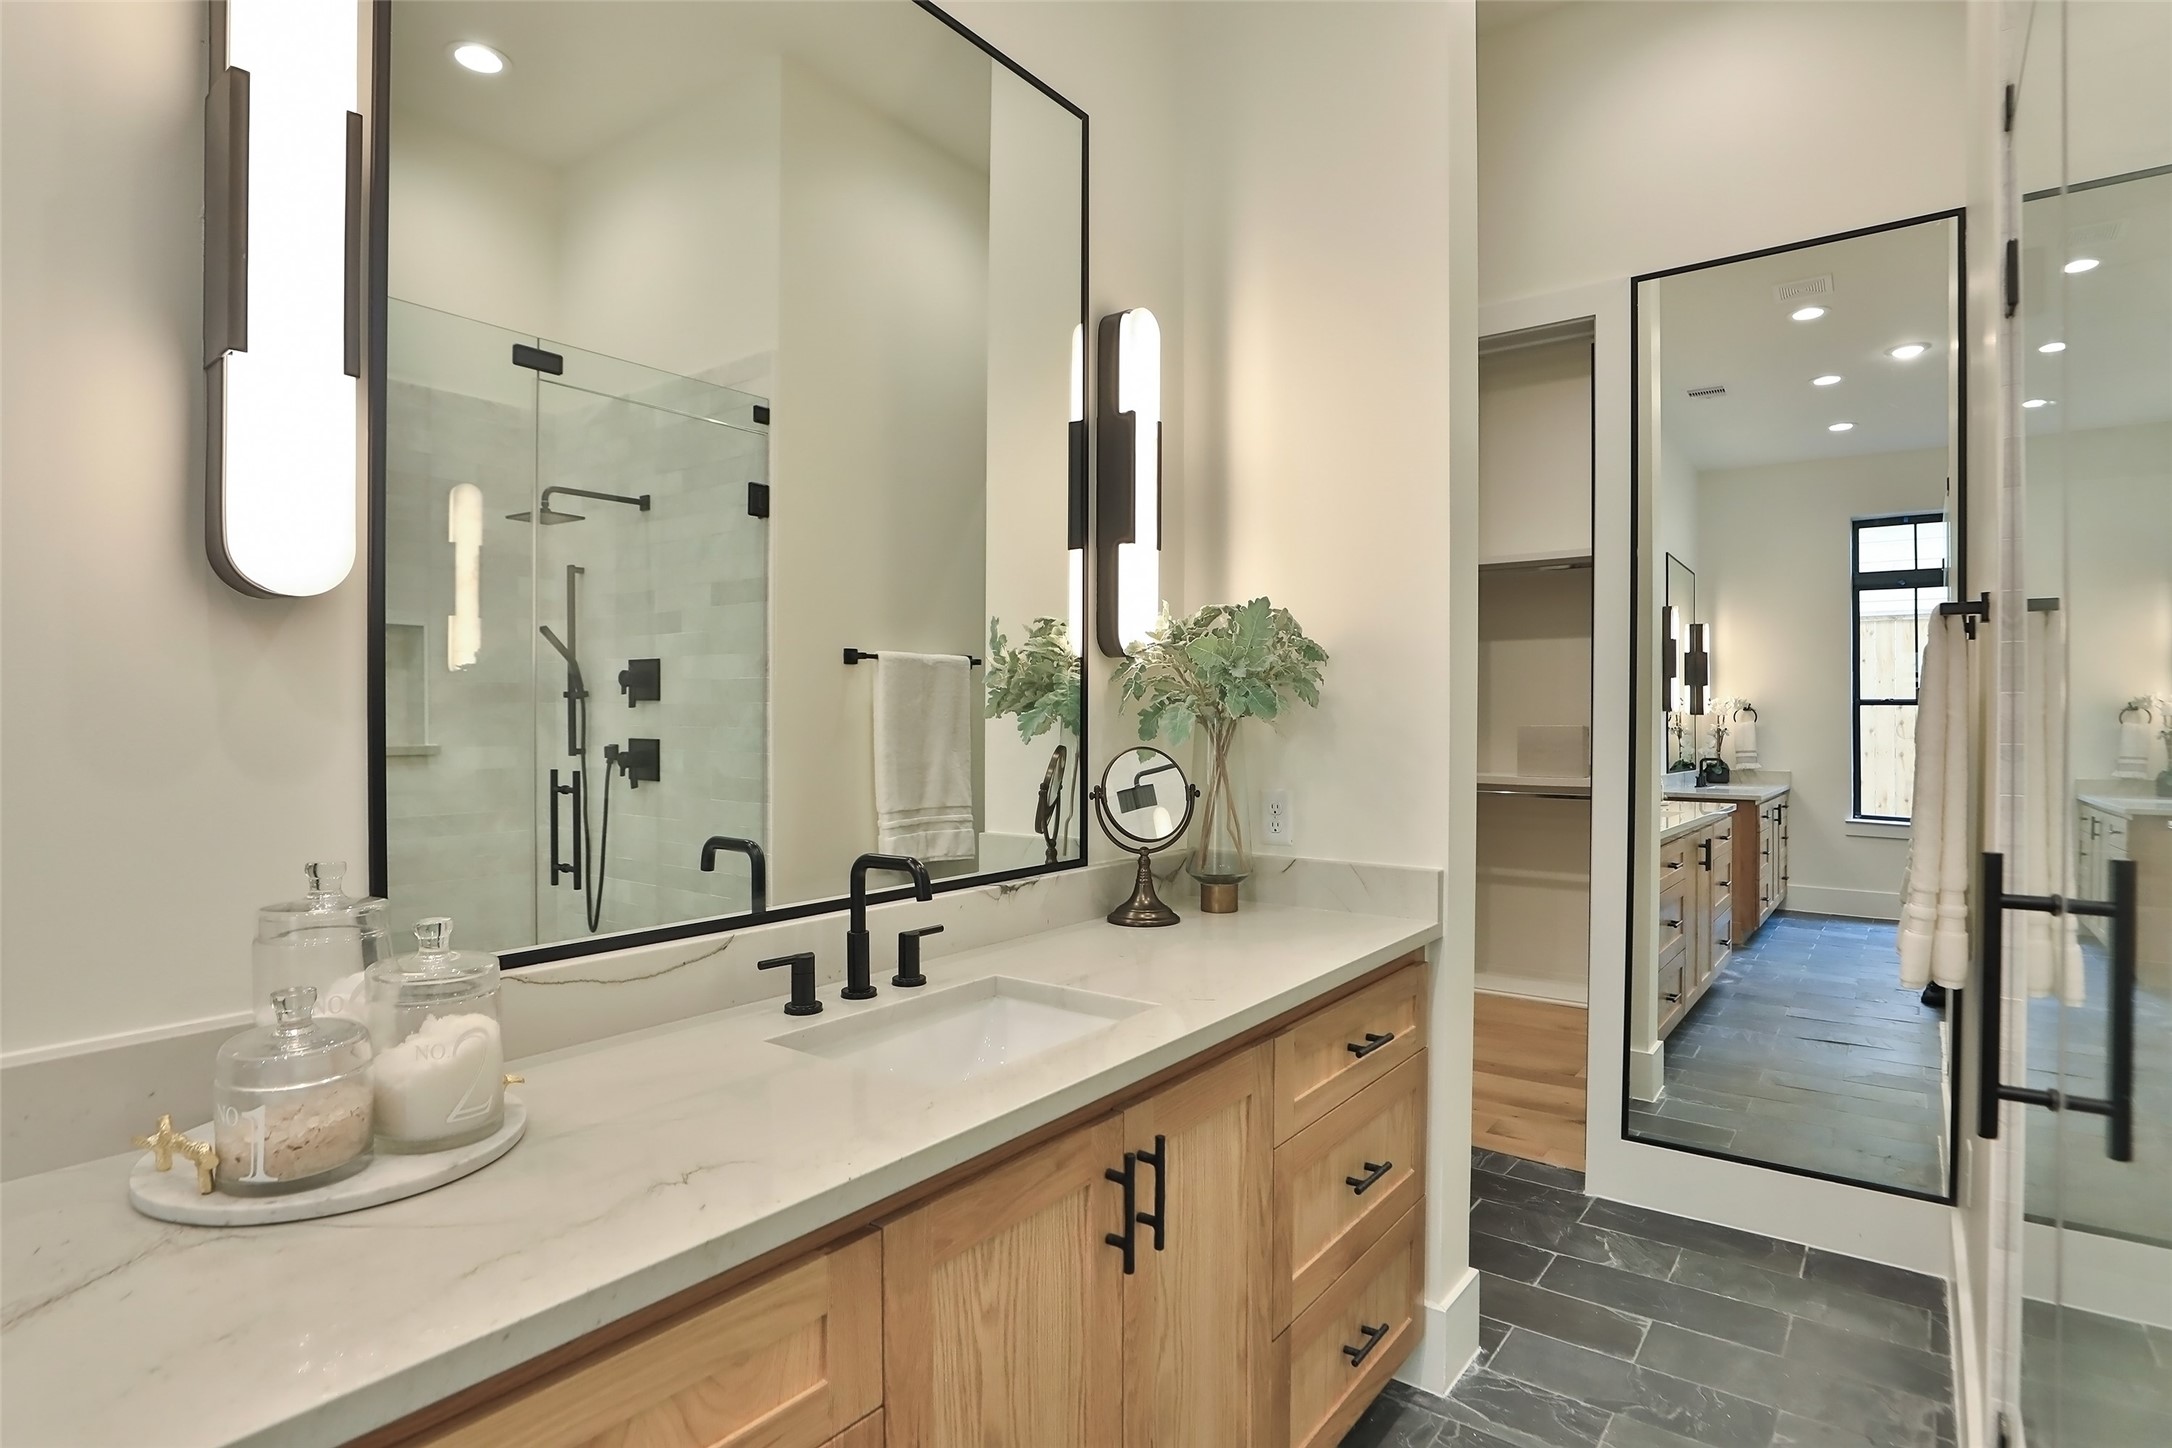 The primary bathroom has 3cm Mont Blanc Quartzite counters with rectangular sinks and matte black faucets. The mirrors are flanked by oversized Alabaster scones by Kelly Wearstler.